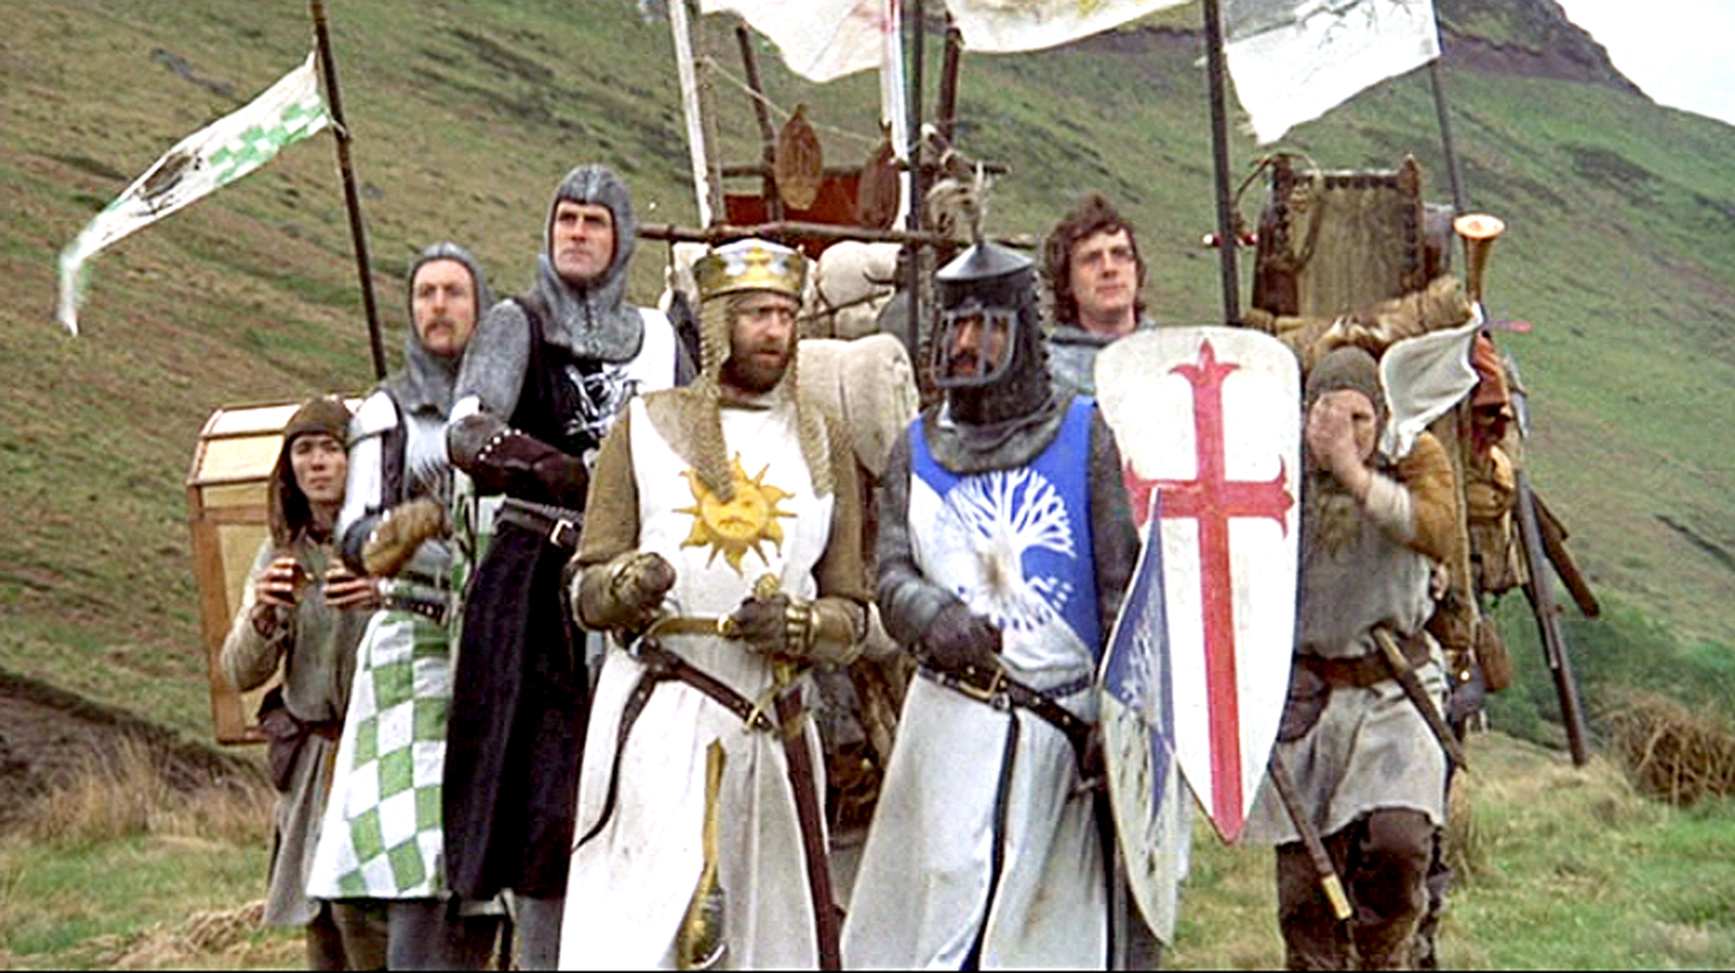 Kinghts on a quest- Monty Python's Holy Grail